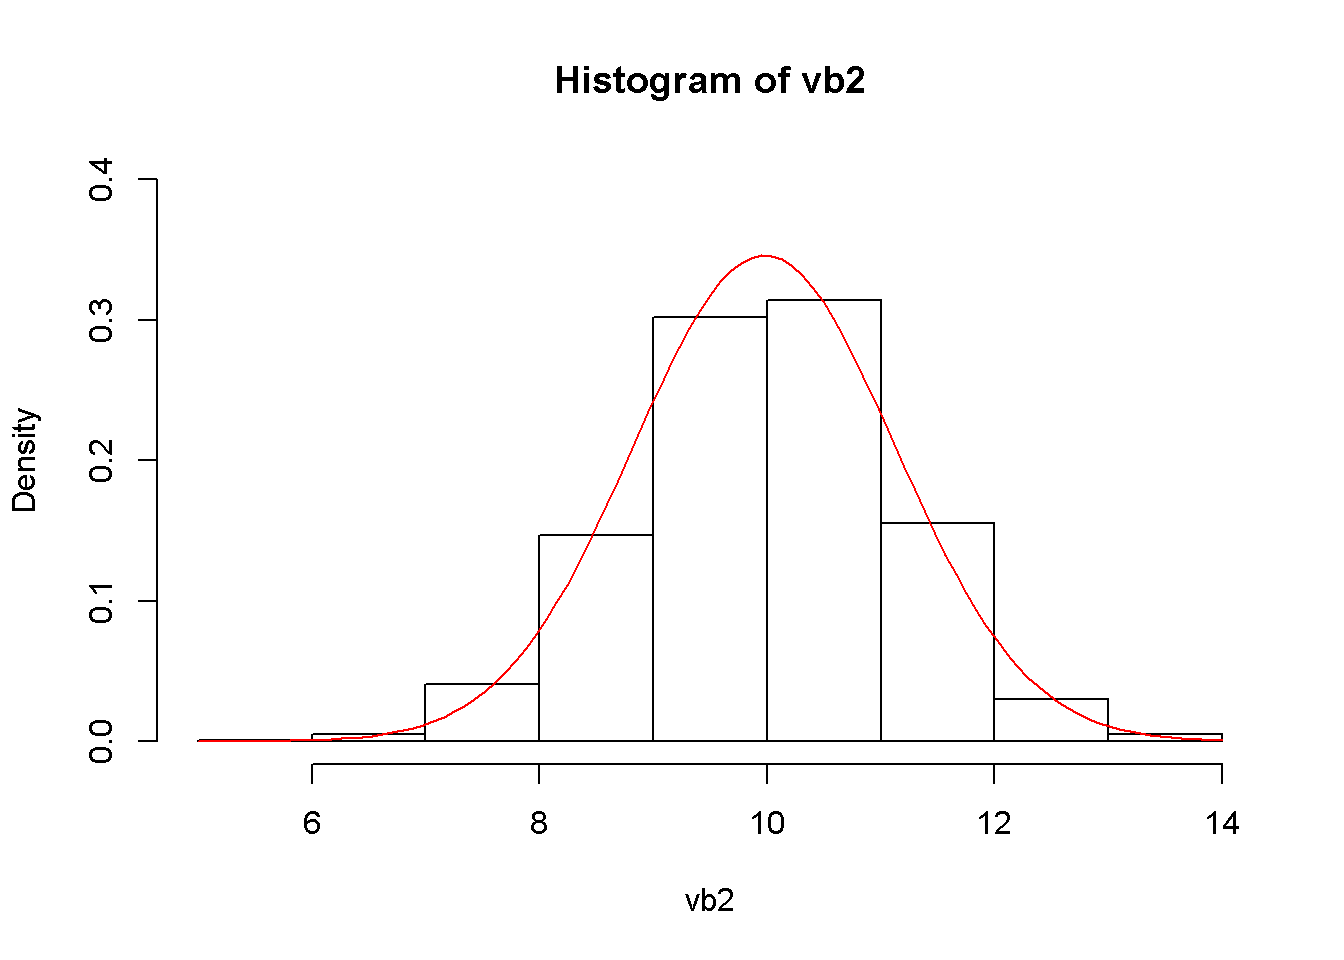 The simulated and theoretical distributions of $b_{2}$